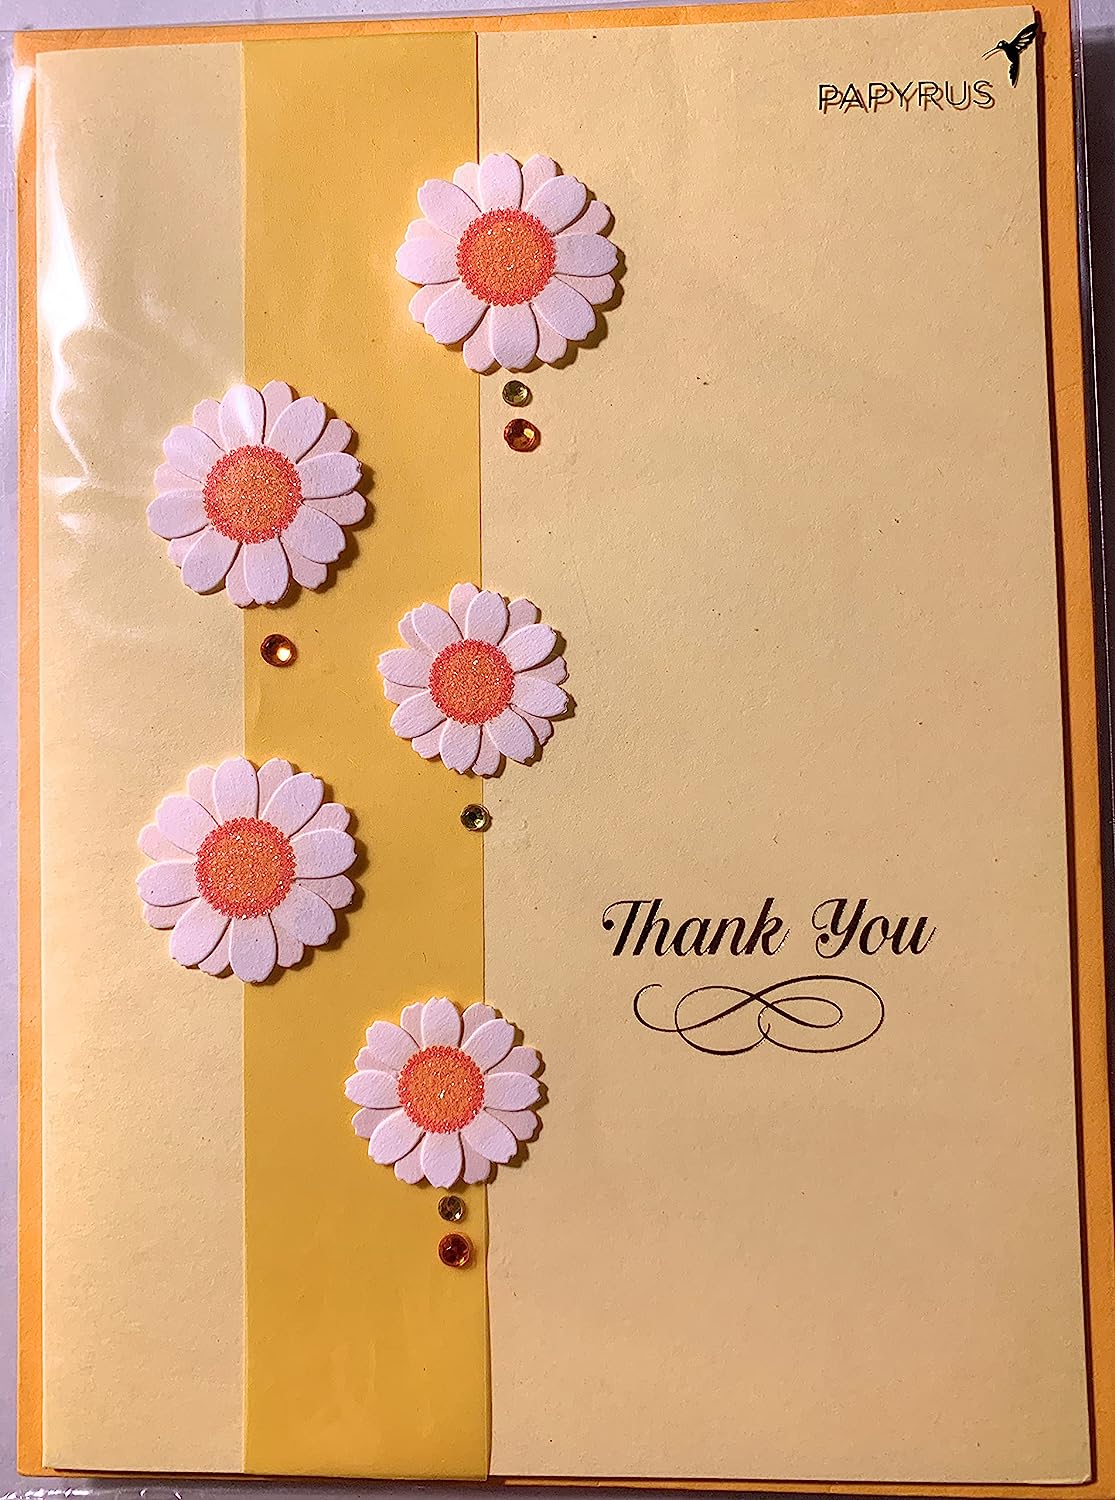 Papyrus Band of Daisies Thank You Card – Roby's Flowers & Gifts